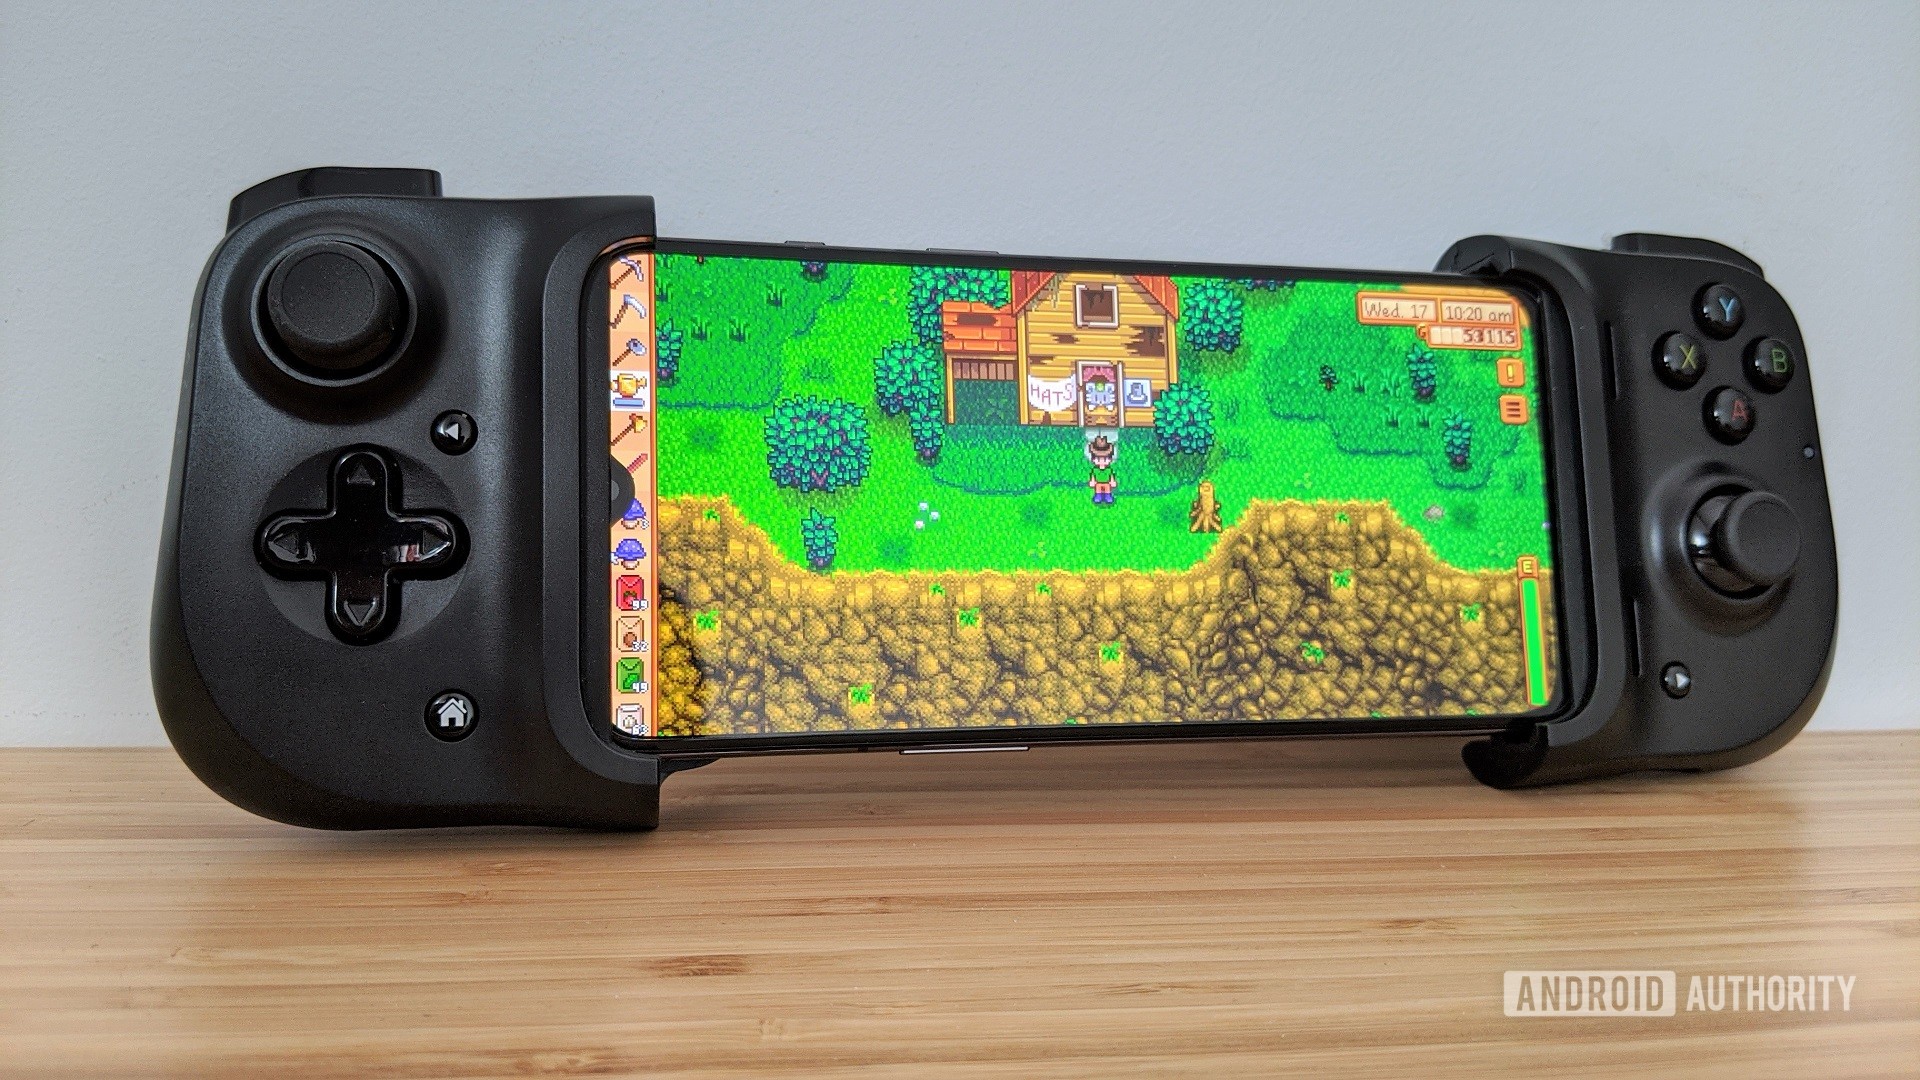 Razer Kishi Review: The Smartphone Controller to Buy